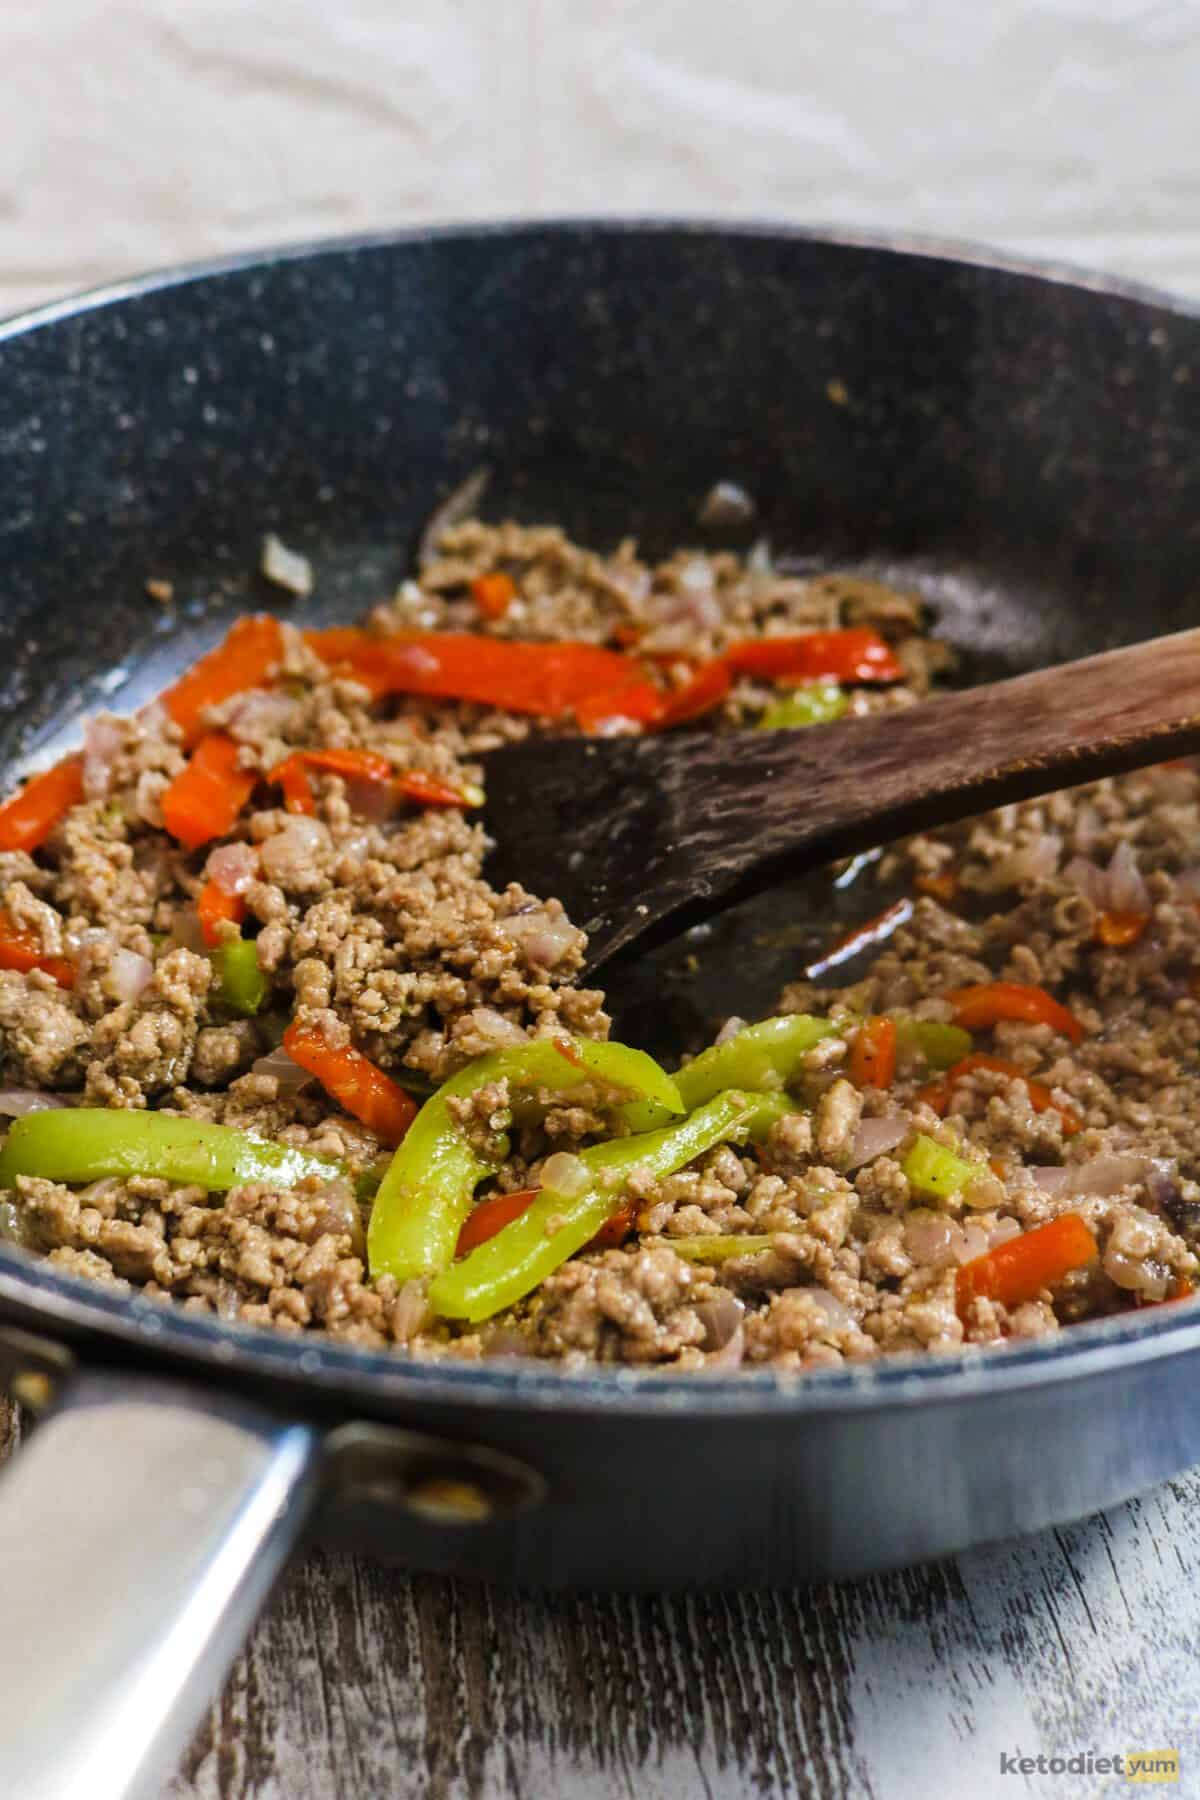 Black frying pan with ground beef, red peppers, green peppers and a wooden spoon